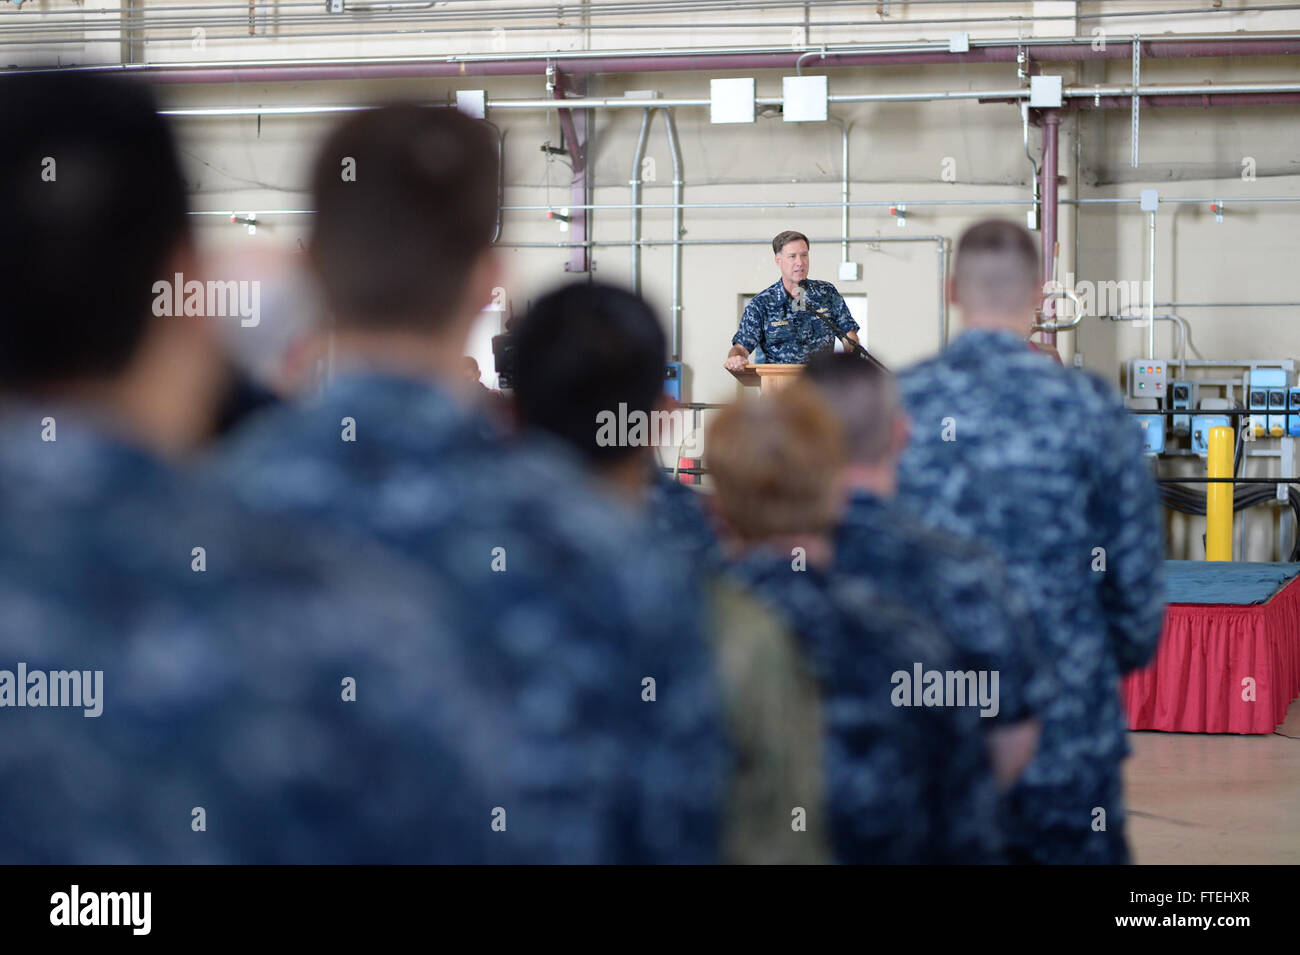 SIGONELLA, Sicily (Oct. 29, 2014) Adm. Mark Ferguson, commander of U.S. Naval Forces Europe-Africa, speaks to Sailors, Marines and Airmen during an all-hands call aboard Naval Air Station (NAS) Sigonella, Oct. 29.  Ferguson thanked Sailors for their contributions to the NATO and U.S. Naval Forces Europe-Africa mission. Stock Photo